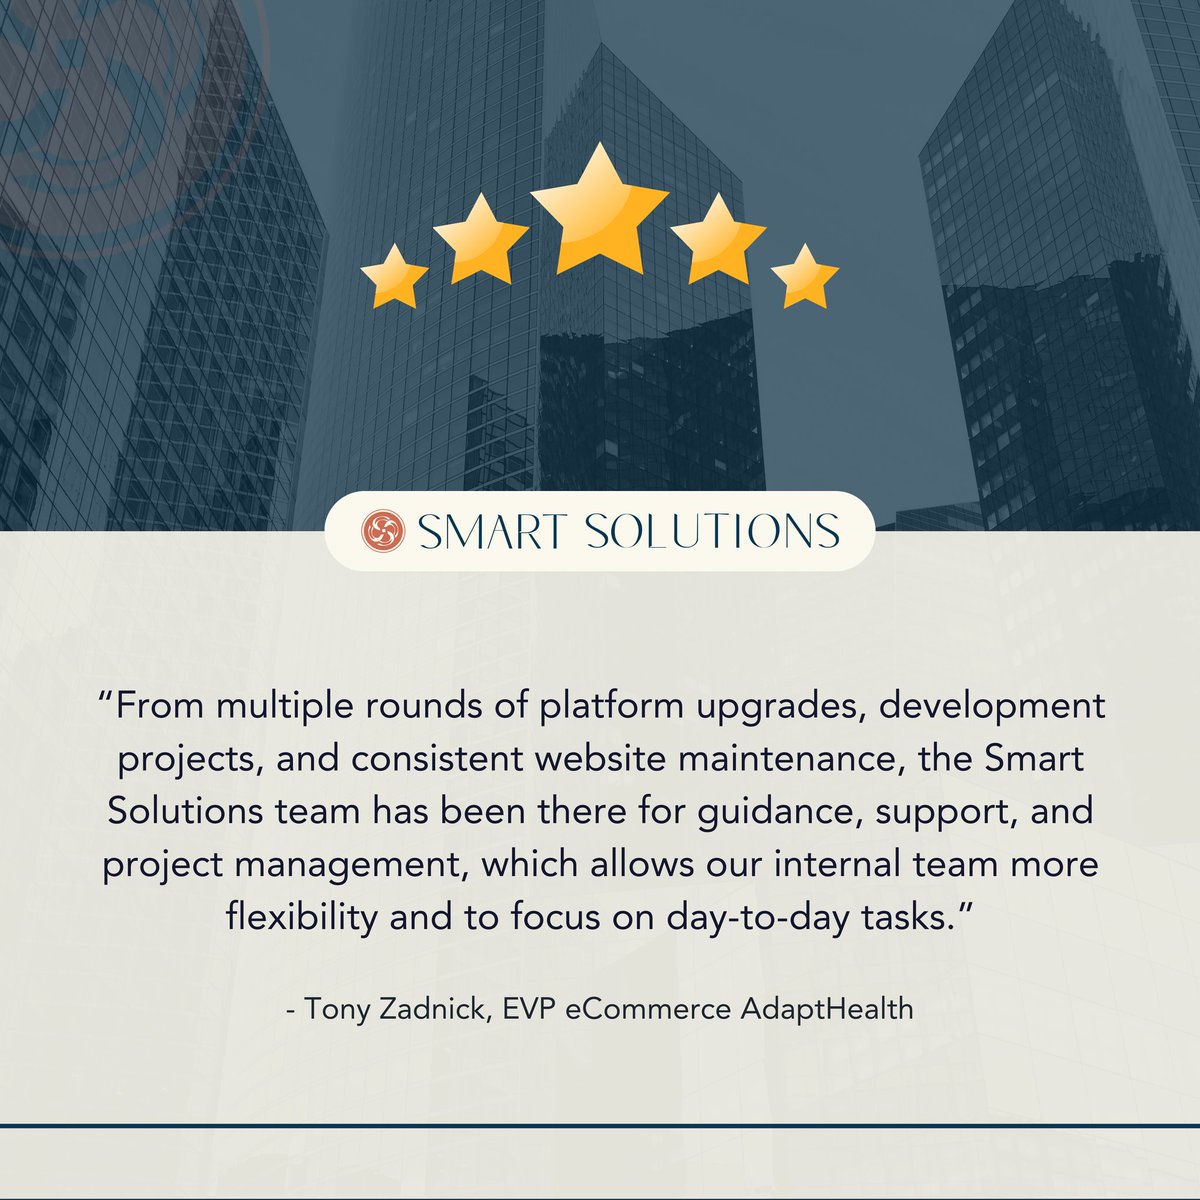 The Smart Solutions team doesn't just offer services; we stand as your reliable partner every step of the way as we work together to achieve your business goals and objectives.

#SmartSolutions #DigitalExcellence #ElevateYourBusiness #StrategicSupport